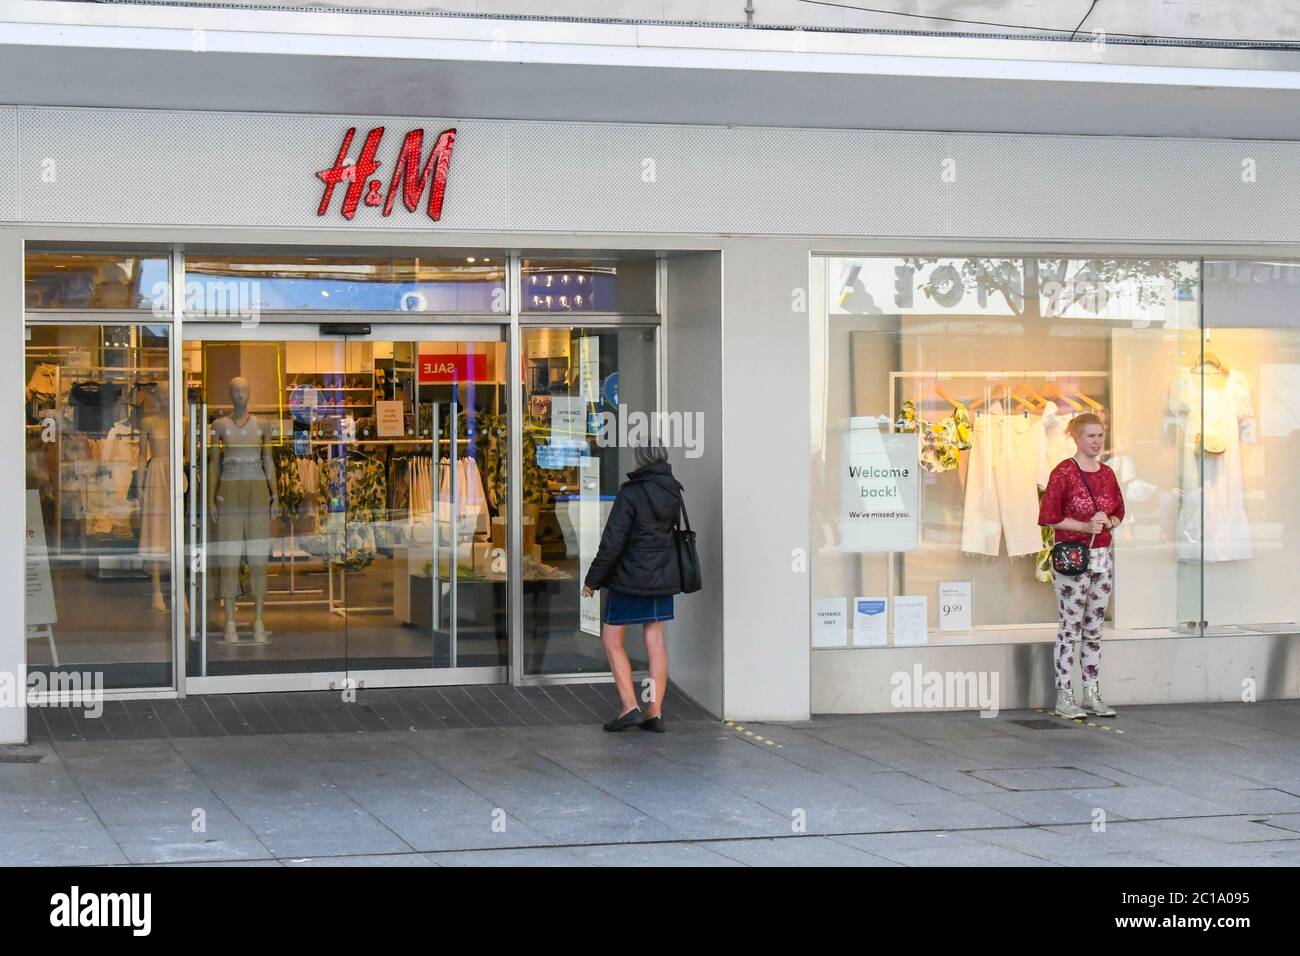 Exeter, Devon, UK. 15th June 2020. Shops selling unessential items allowed  to reopen today as coronavirus lockdown is eased further. Customers queuing  outside the H&M store in the High Street at Exeter